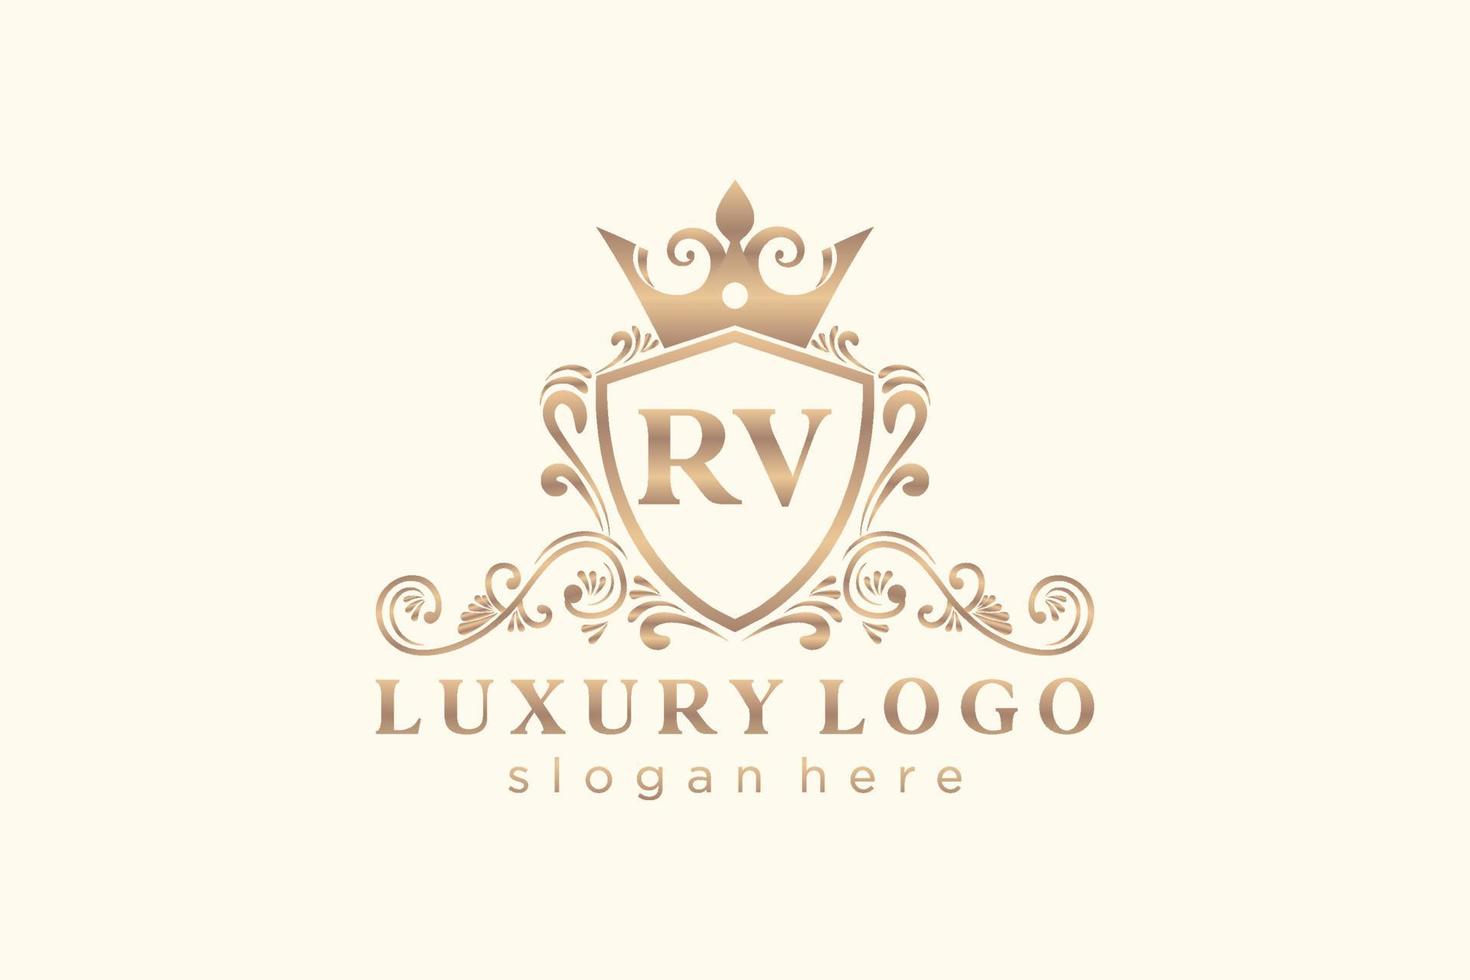 Initial RV Letter Royal Luxury Logo template in vector art for Restaurant, Royalty, Boutique, Cafe, Hotel, Heraldic, Jewelry, Fashion and other vector illustration.